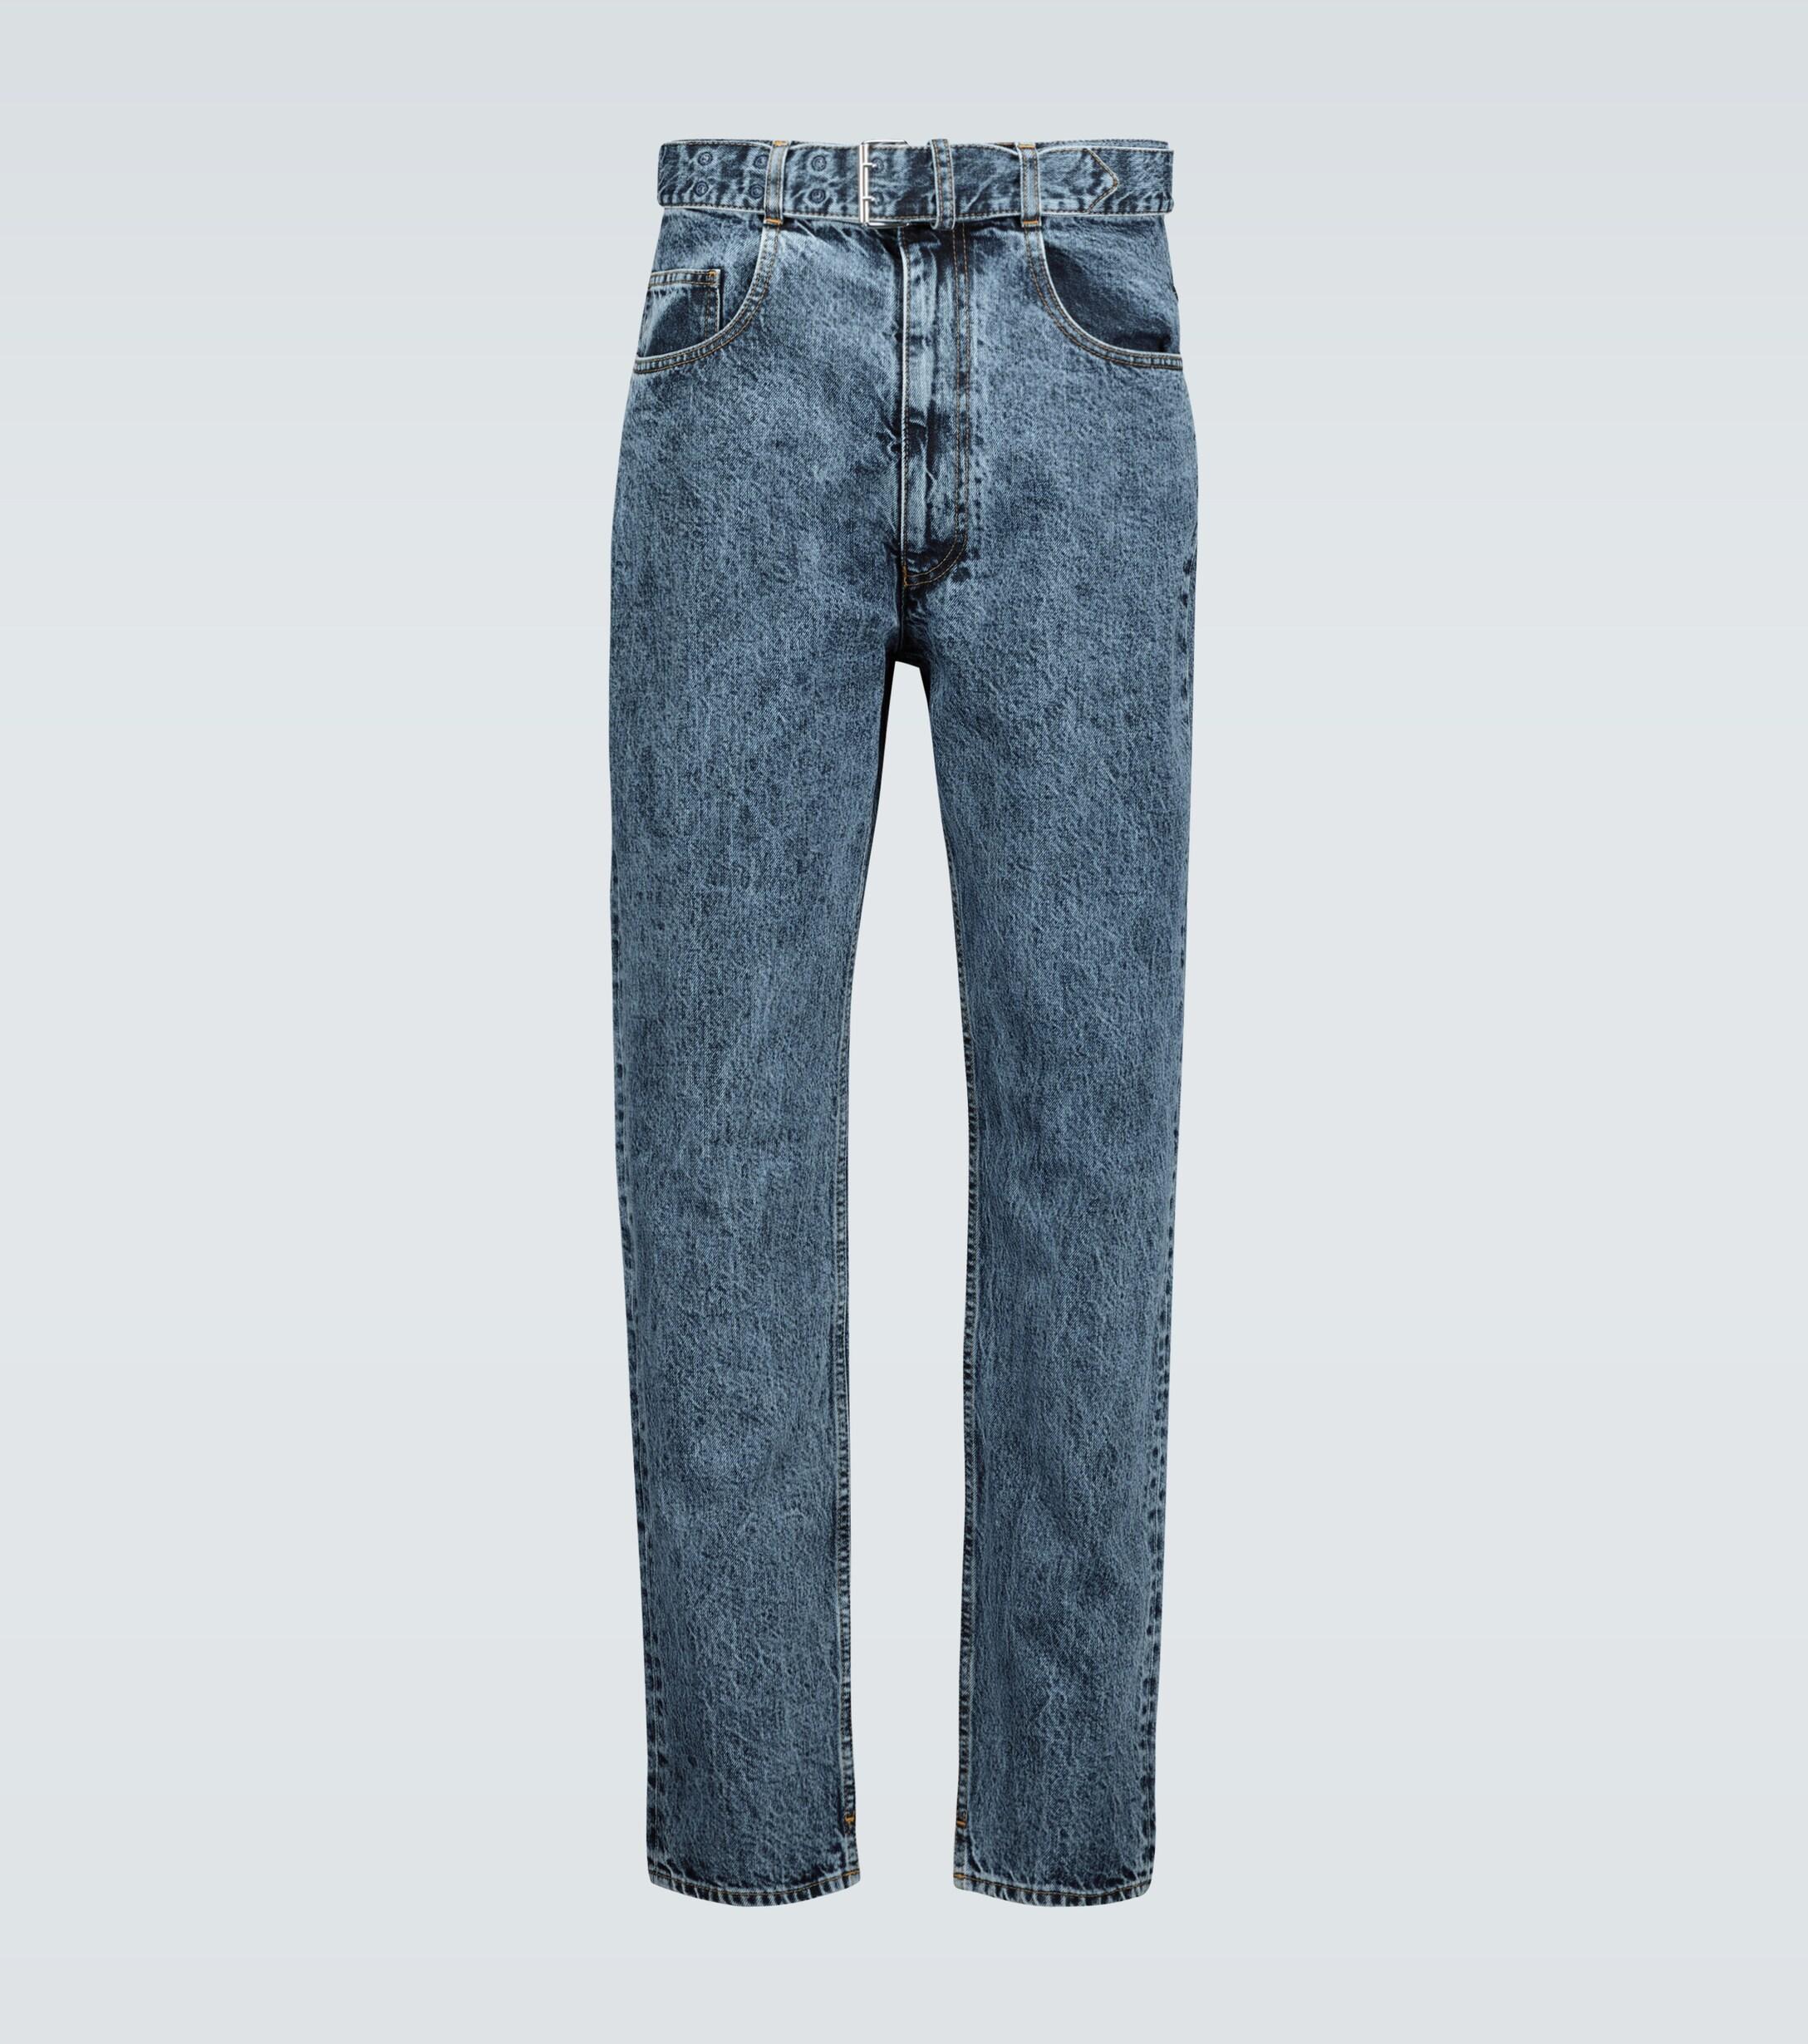 Maison Margiela Denim Belted Relaxed-fit Jeans in Blue for Men - Lyst